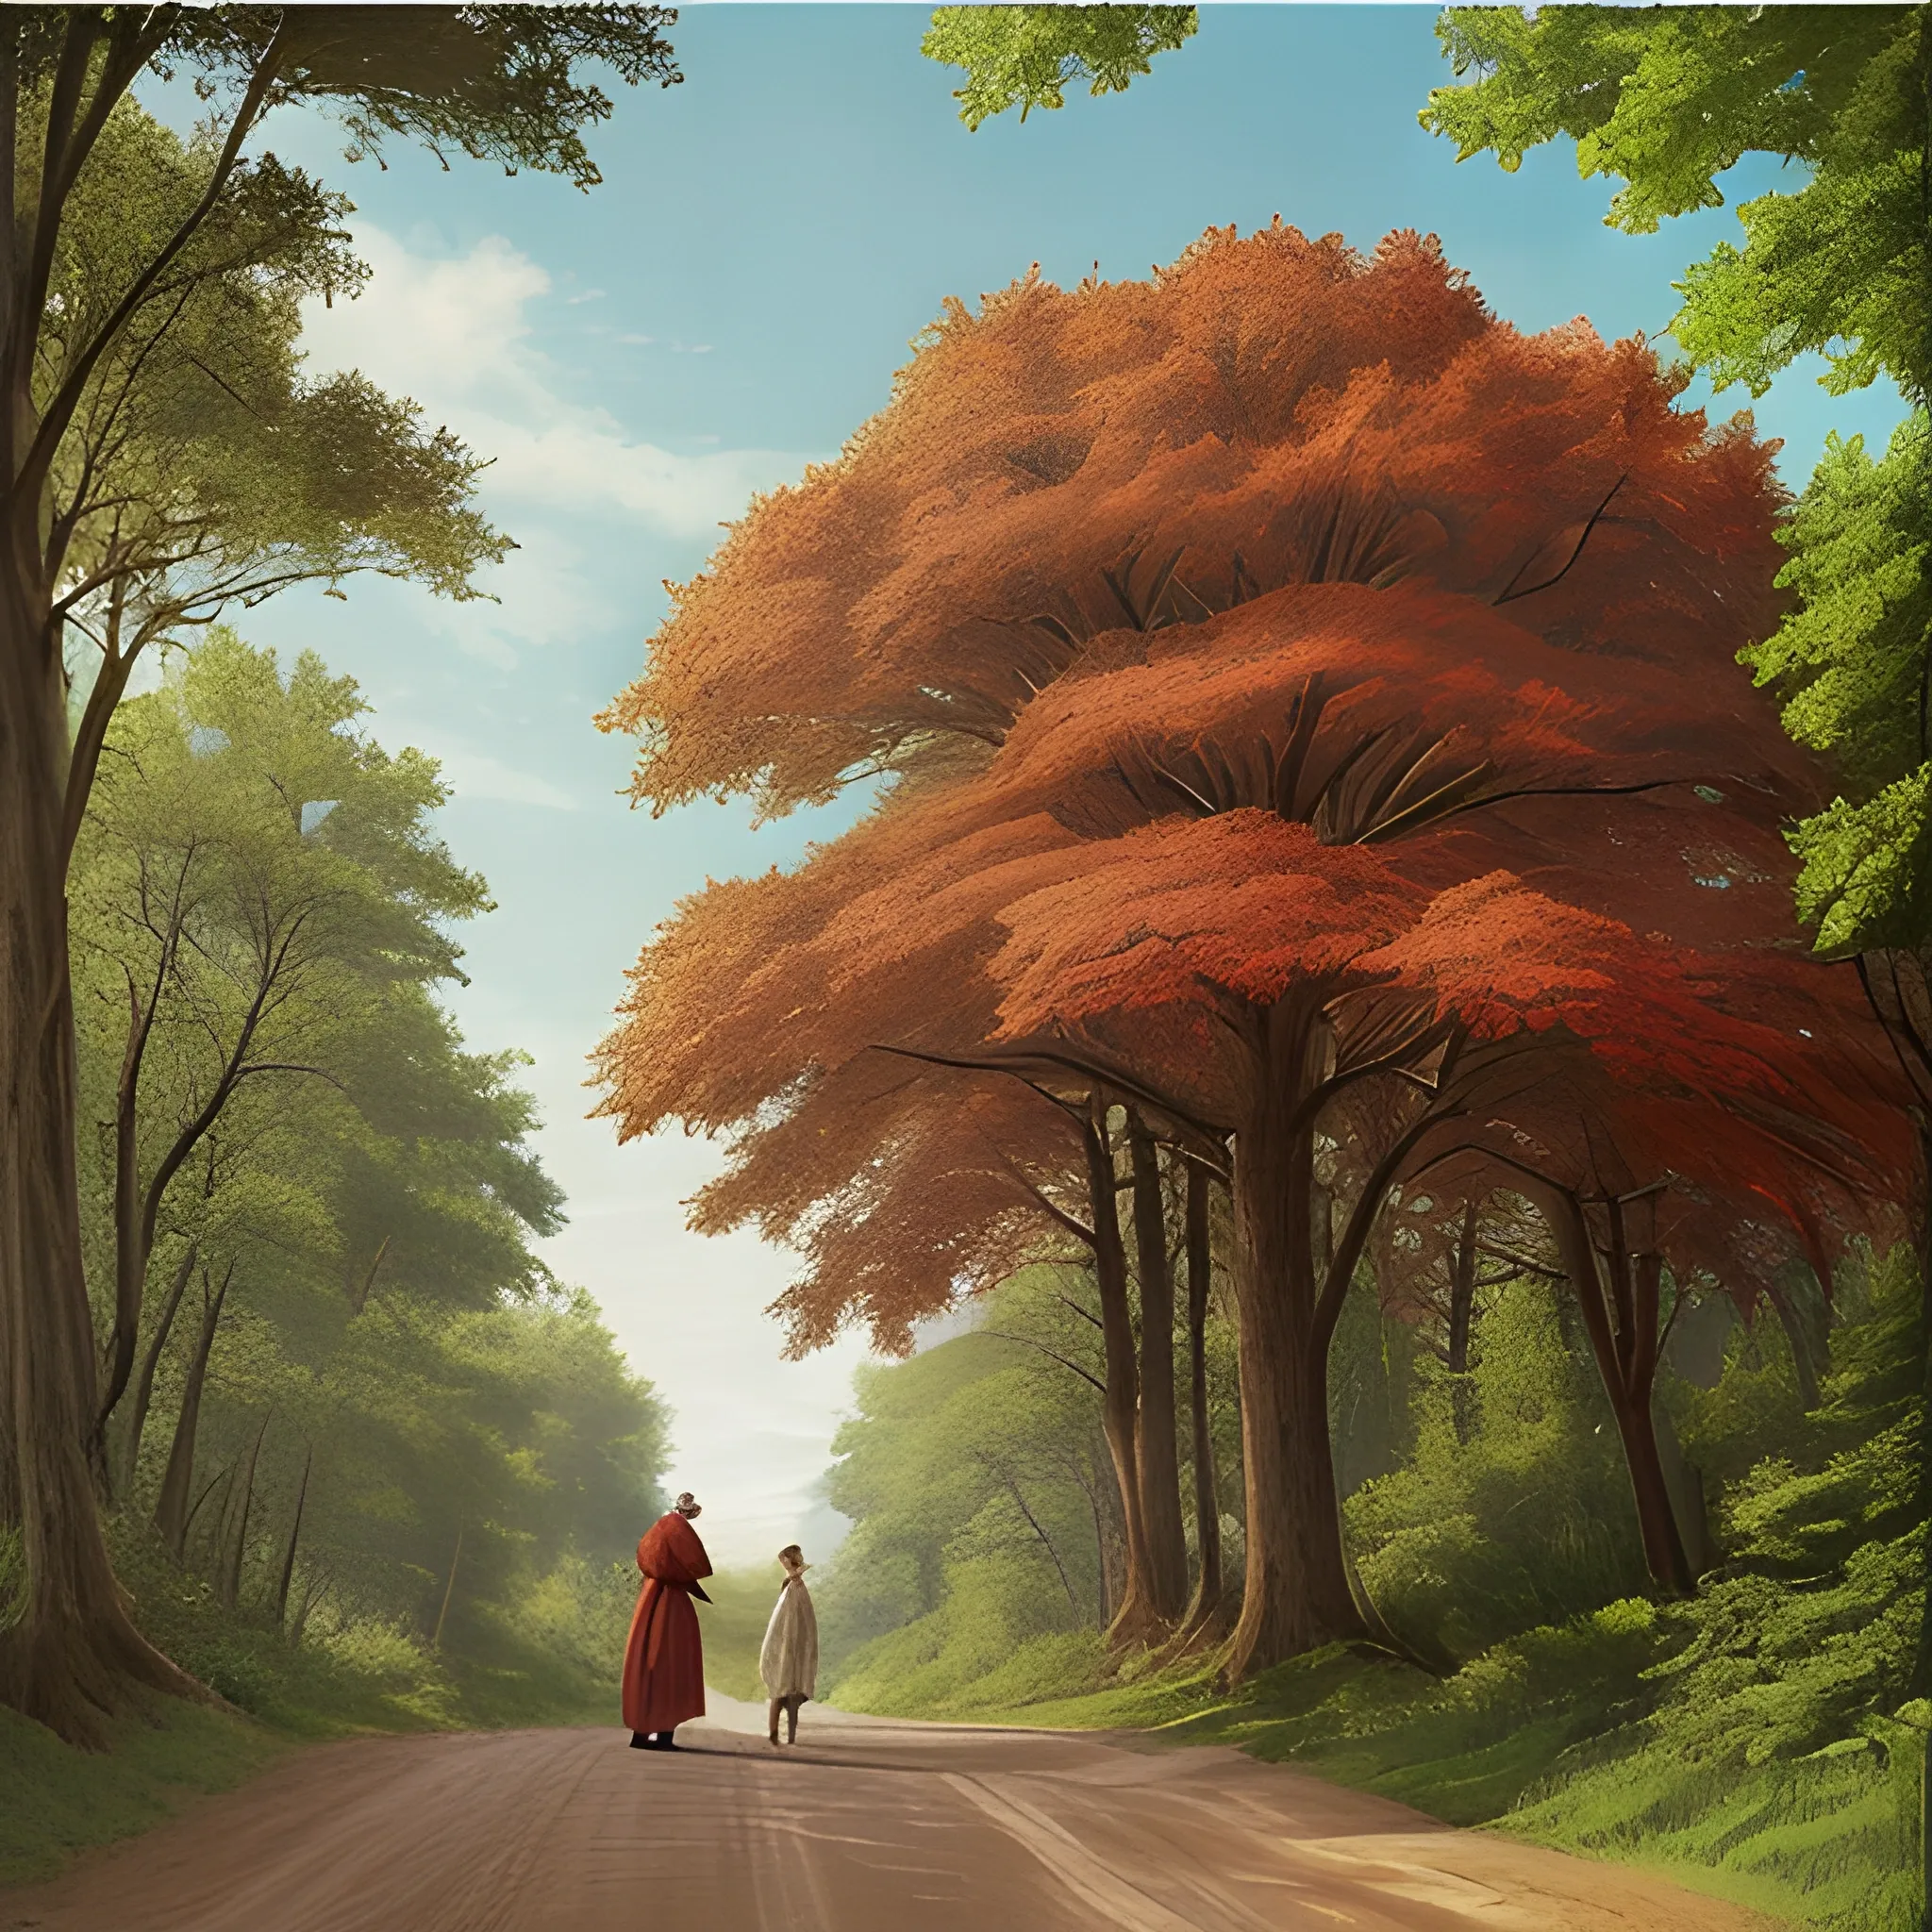 Landscape of a forest with large cedar trees. The leaves are lush green. There is a dirt road going down the middle with trees on either side. There are two figures walking down the road, backs facing the camera. One figure is a man with red hair and simple medieval garb. The other figure is a woman with long brown hair and a plain white dress. High quality. Realistic. Medieval times. 